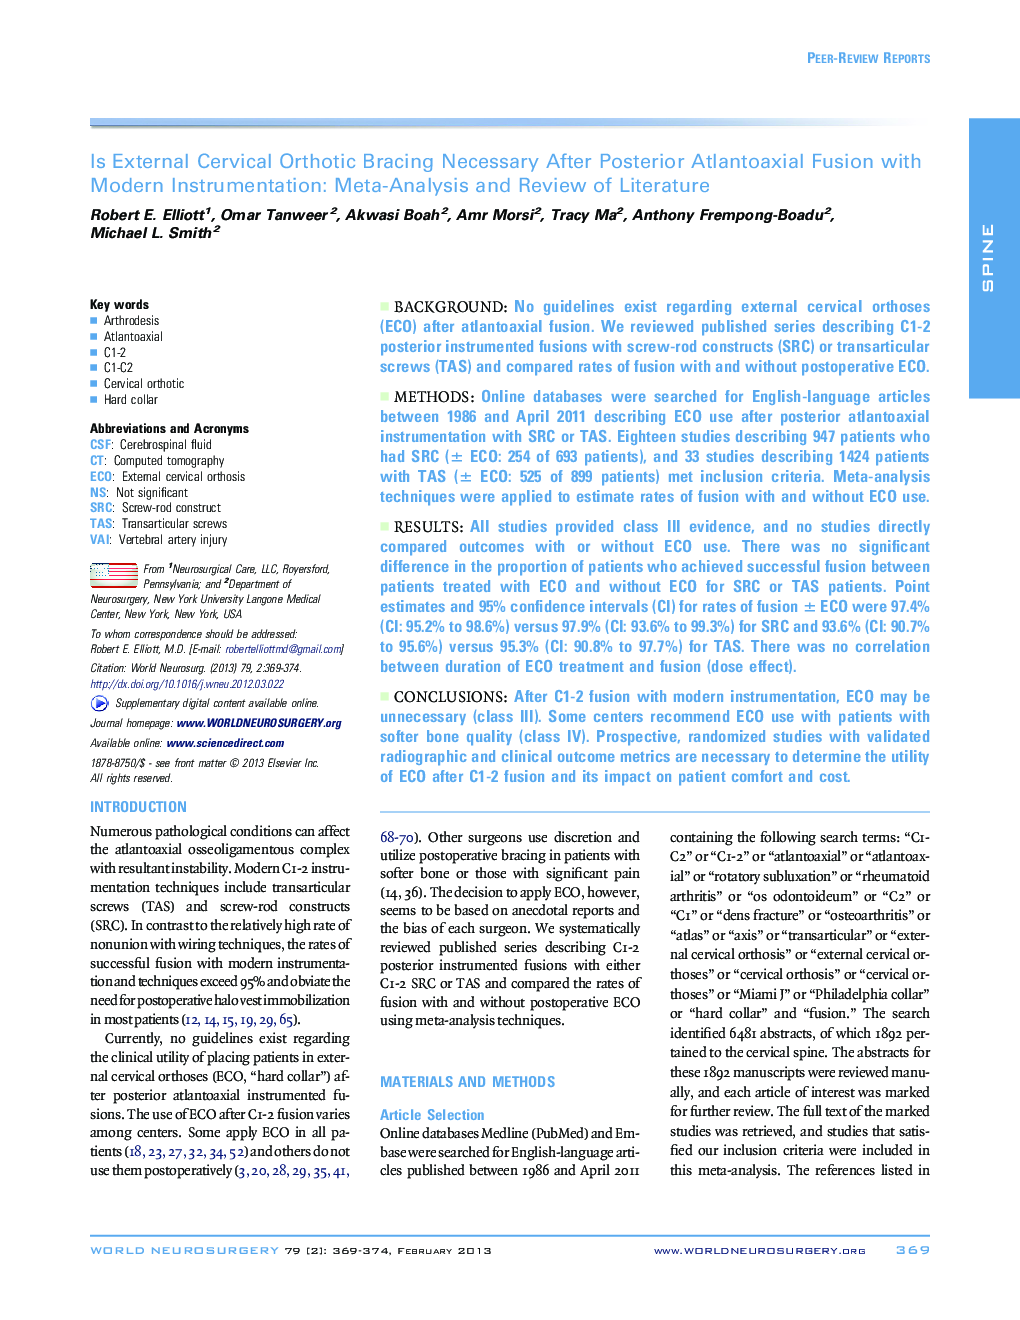 Is External Cervical Orthotic Bracing Necessary After Posterior Atlantoaxial Fusion with Modern Instrumentation: Meta-Analysis and Review of Literature